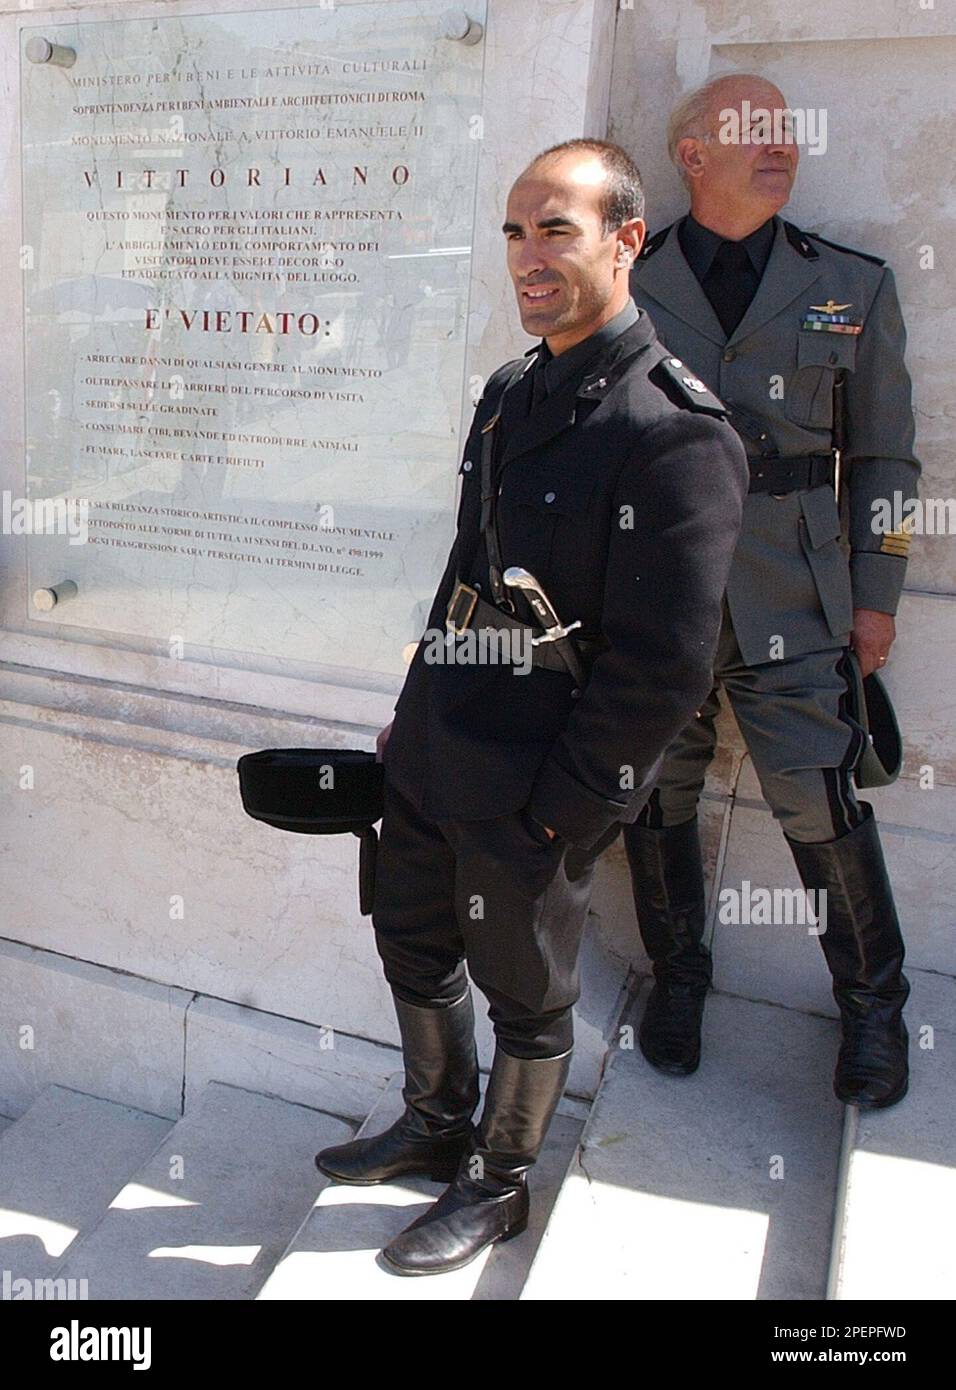 Dressed with the uniform of an Italian Fascist military officer,  professional extra Sergio Albanesi, background, and an unidentified "camicie  nere" (black shirts) colleague, look on next a dress-code and regulations  sign, while